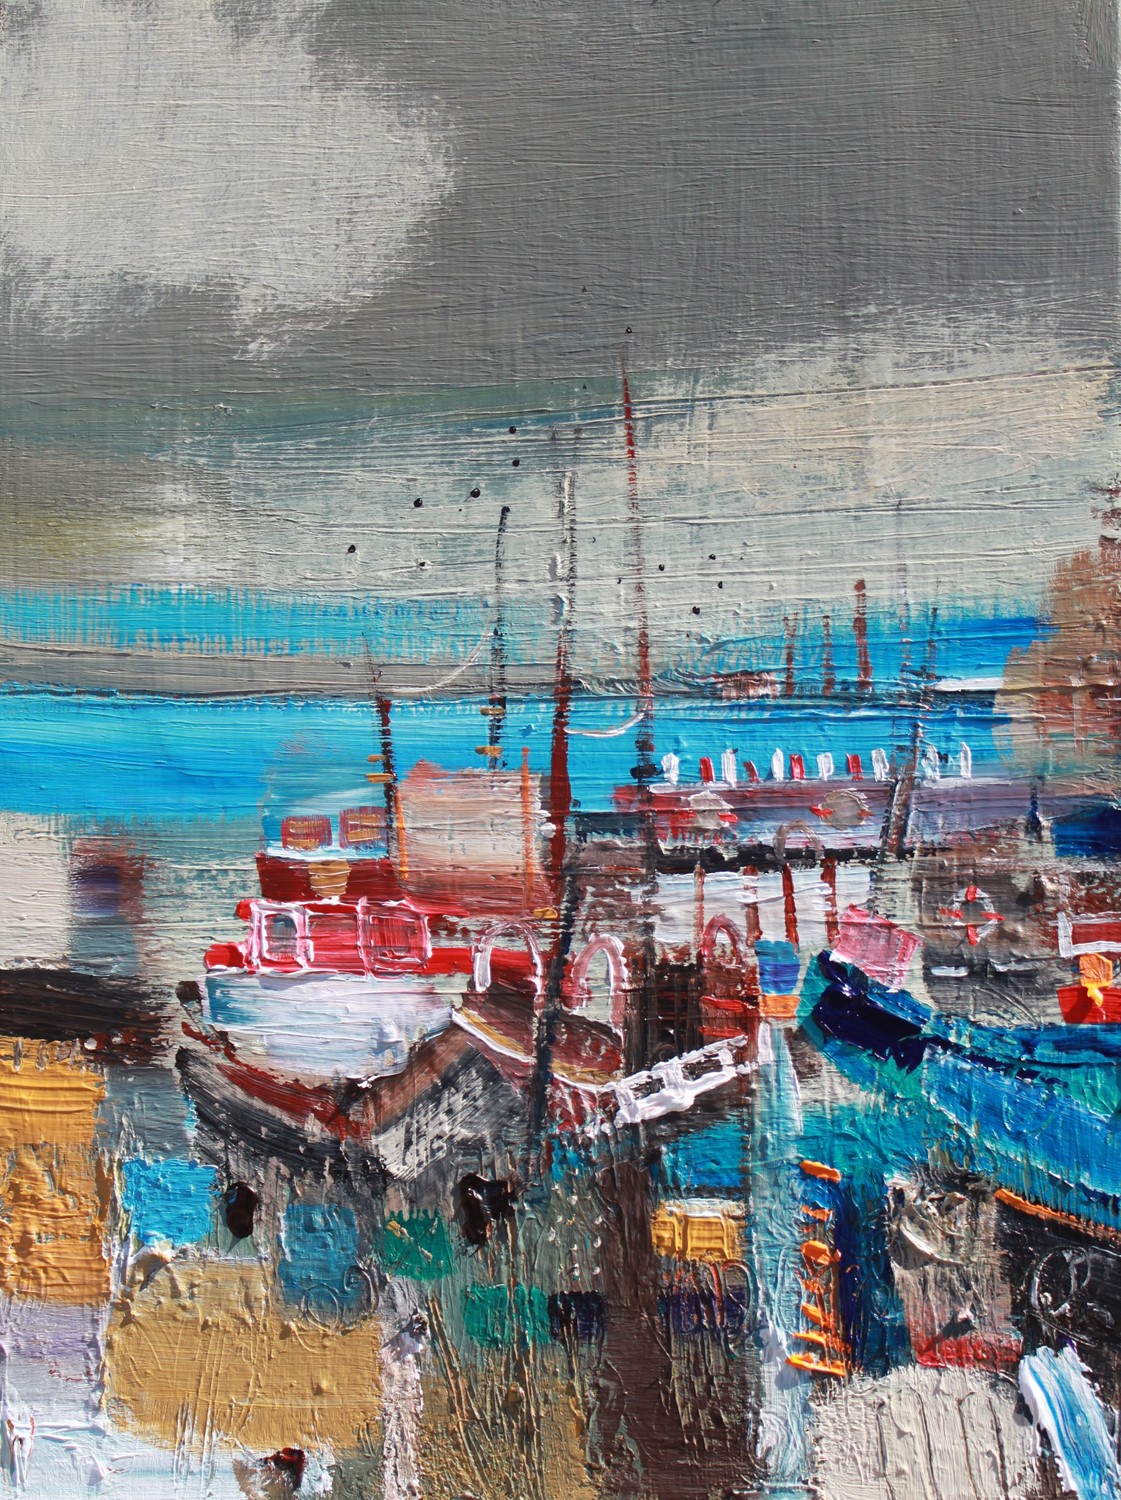 'Bits and Boats' by artist Rosanne Barr